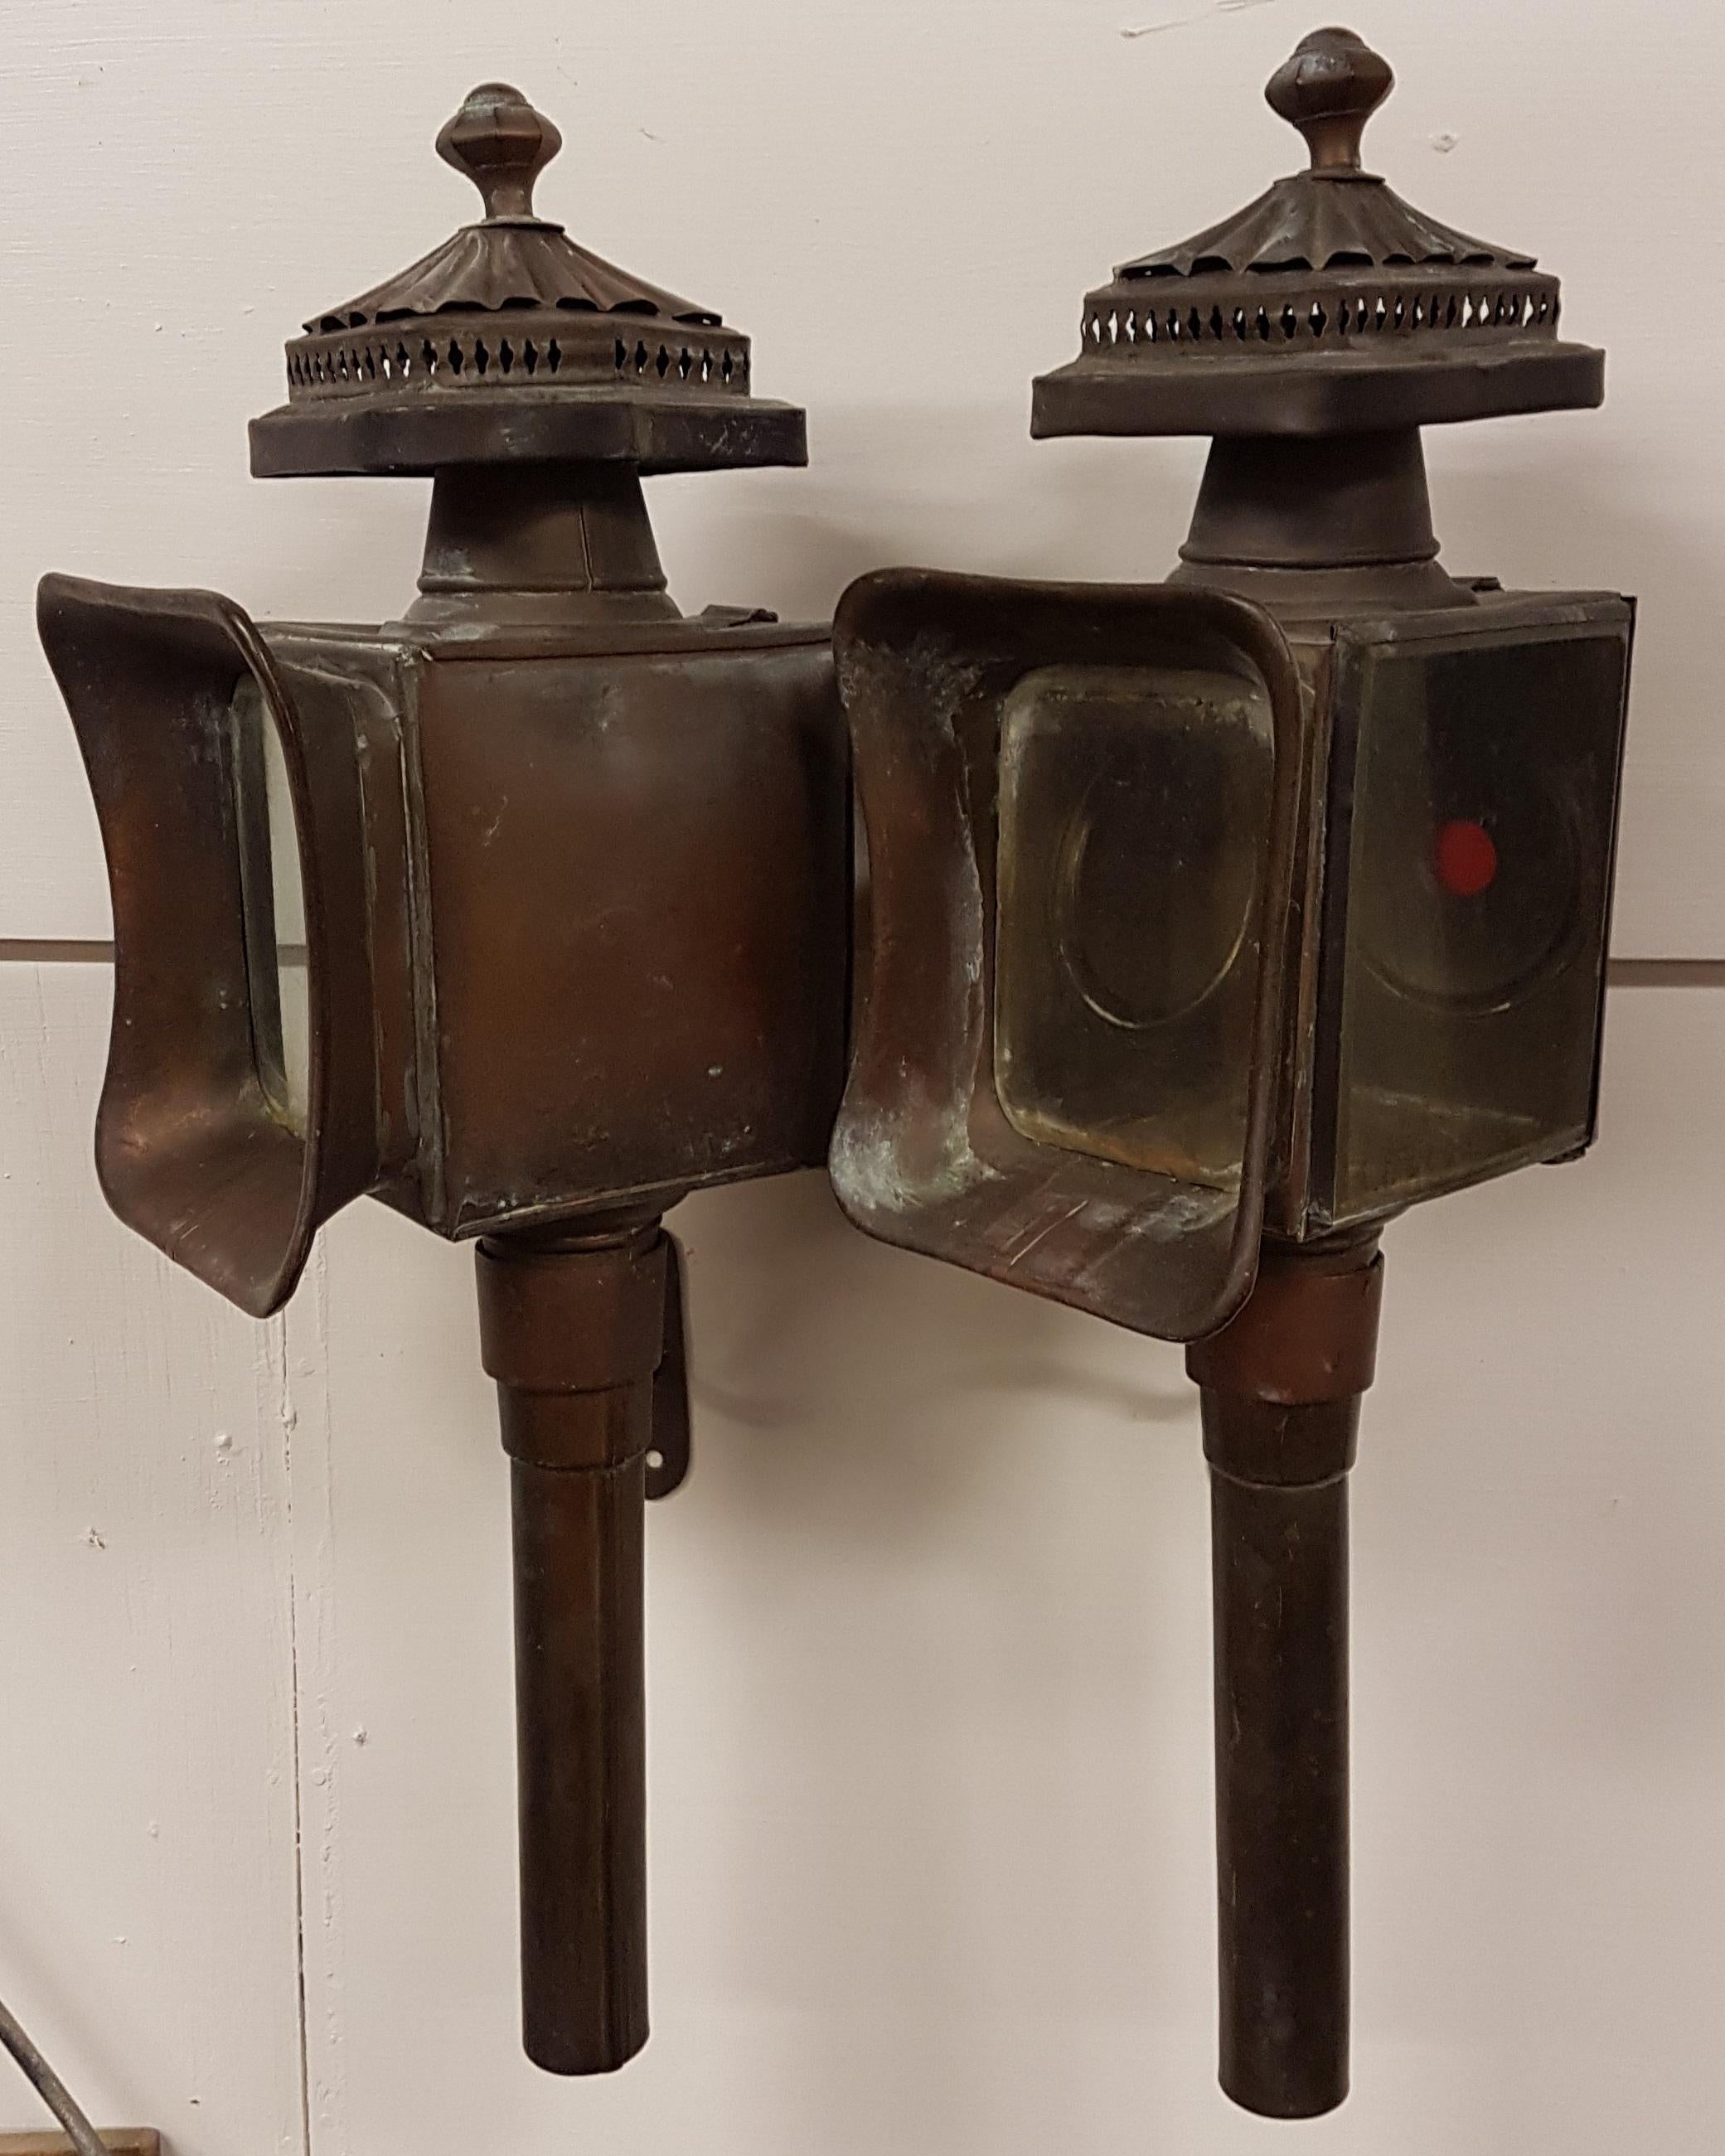 Pair of Brass and Copper Carriage Lanterns (Ende des 20. Jahrhunderts)